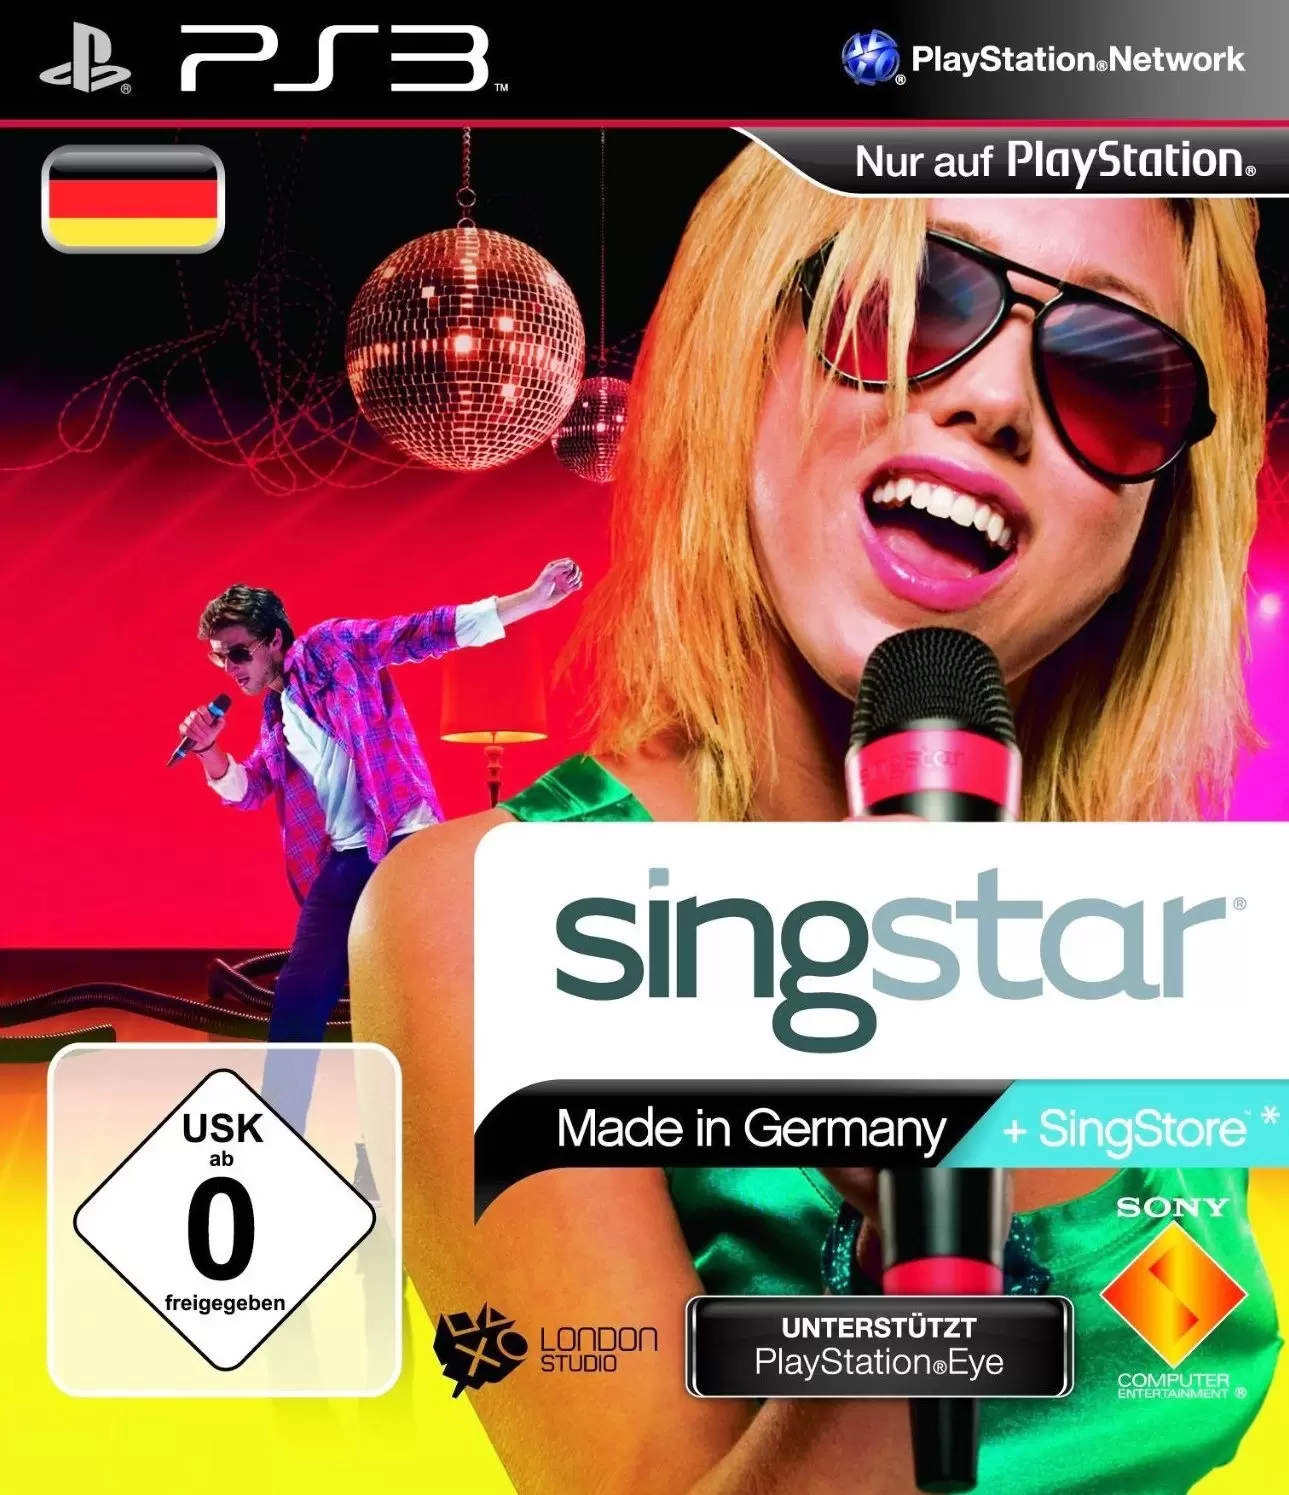 PS3 Games - Singstar Made in Germany